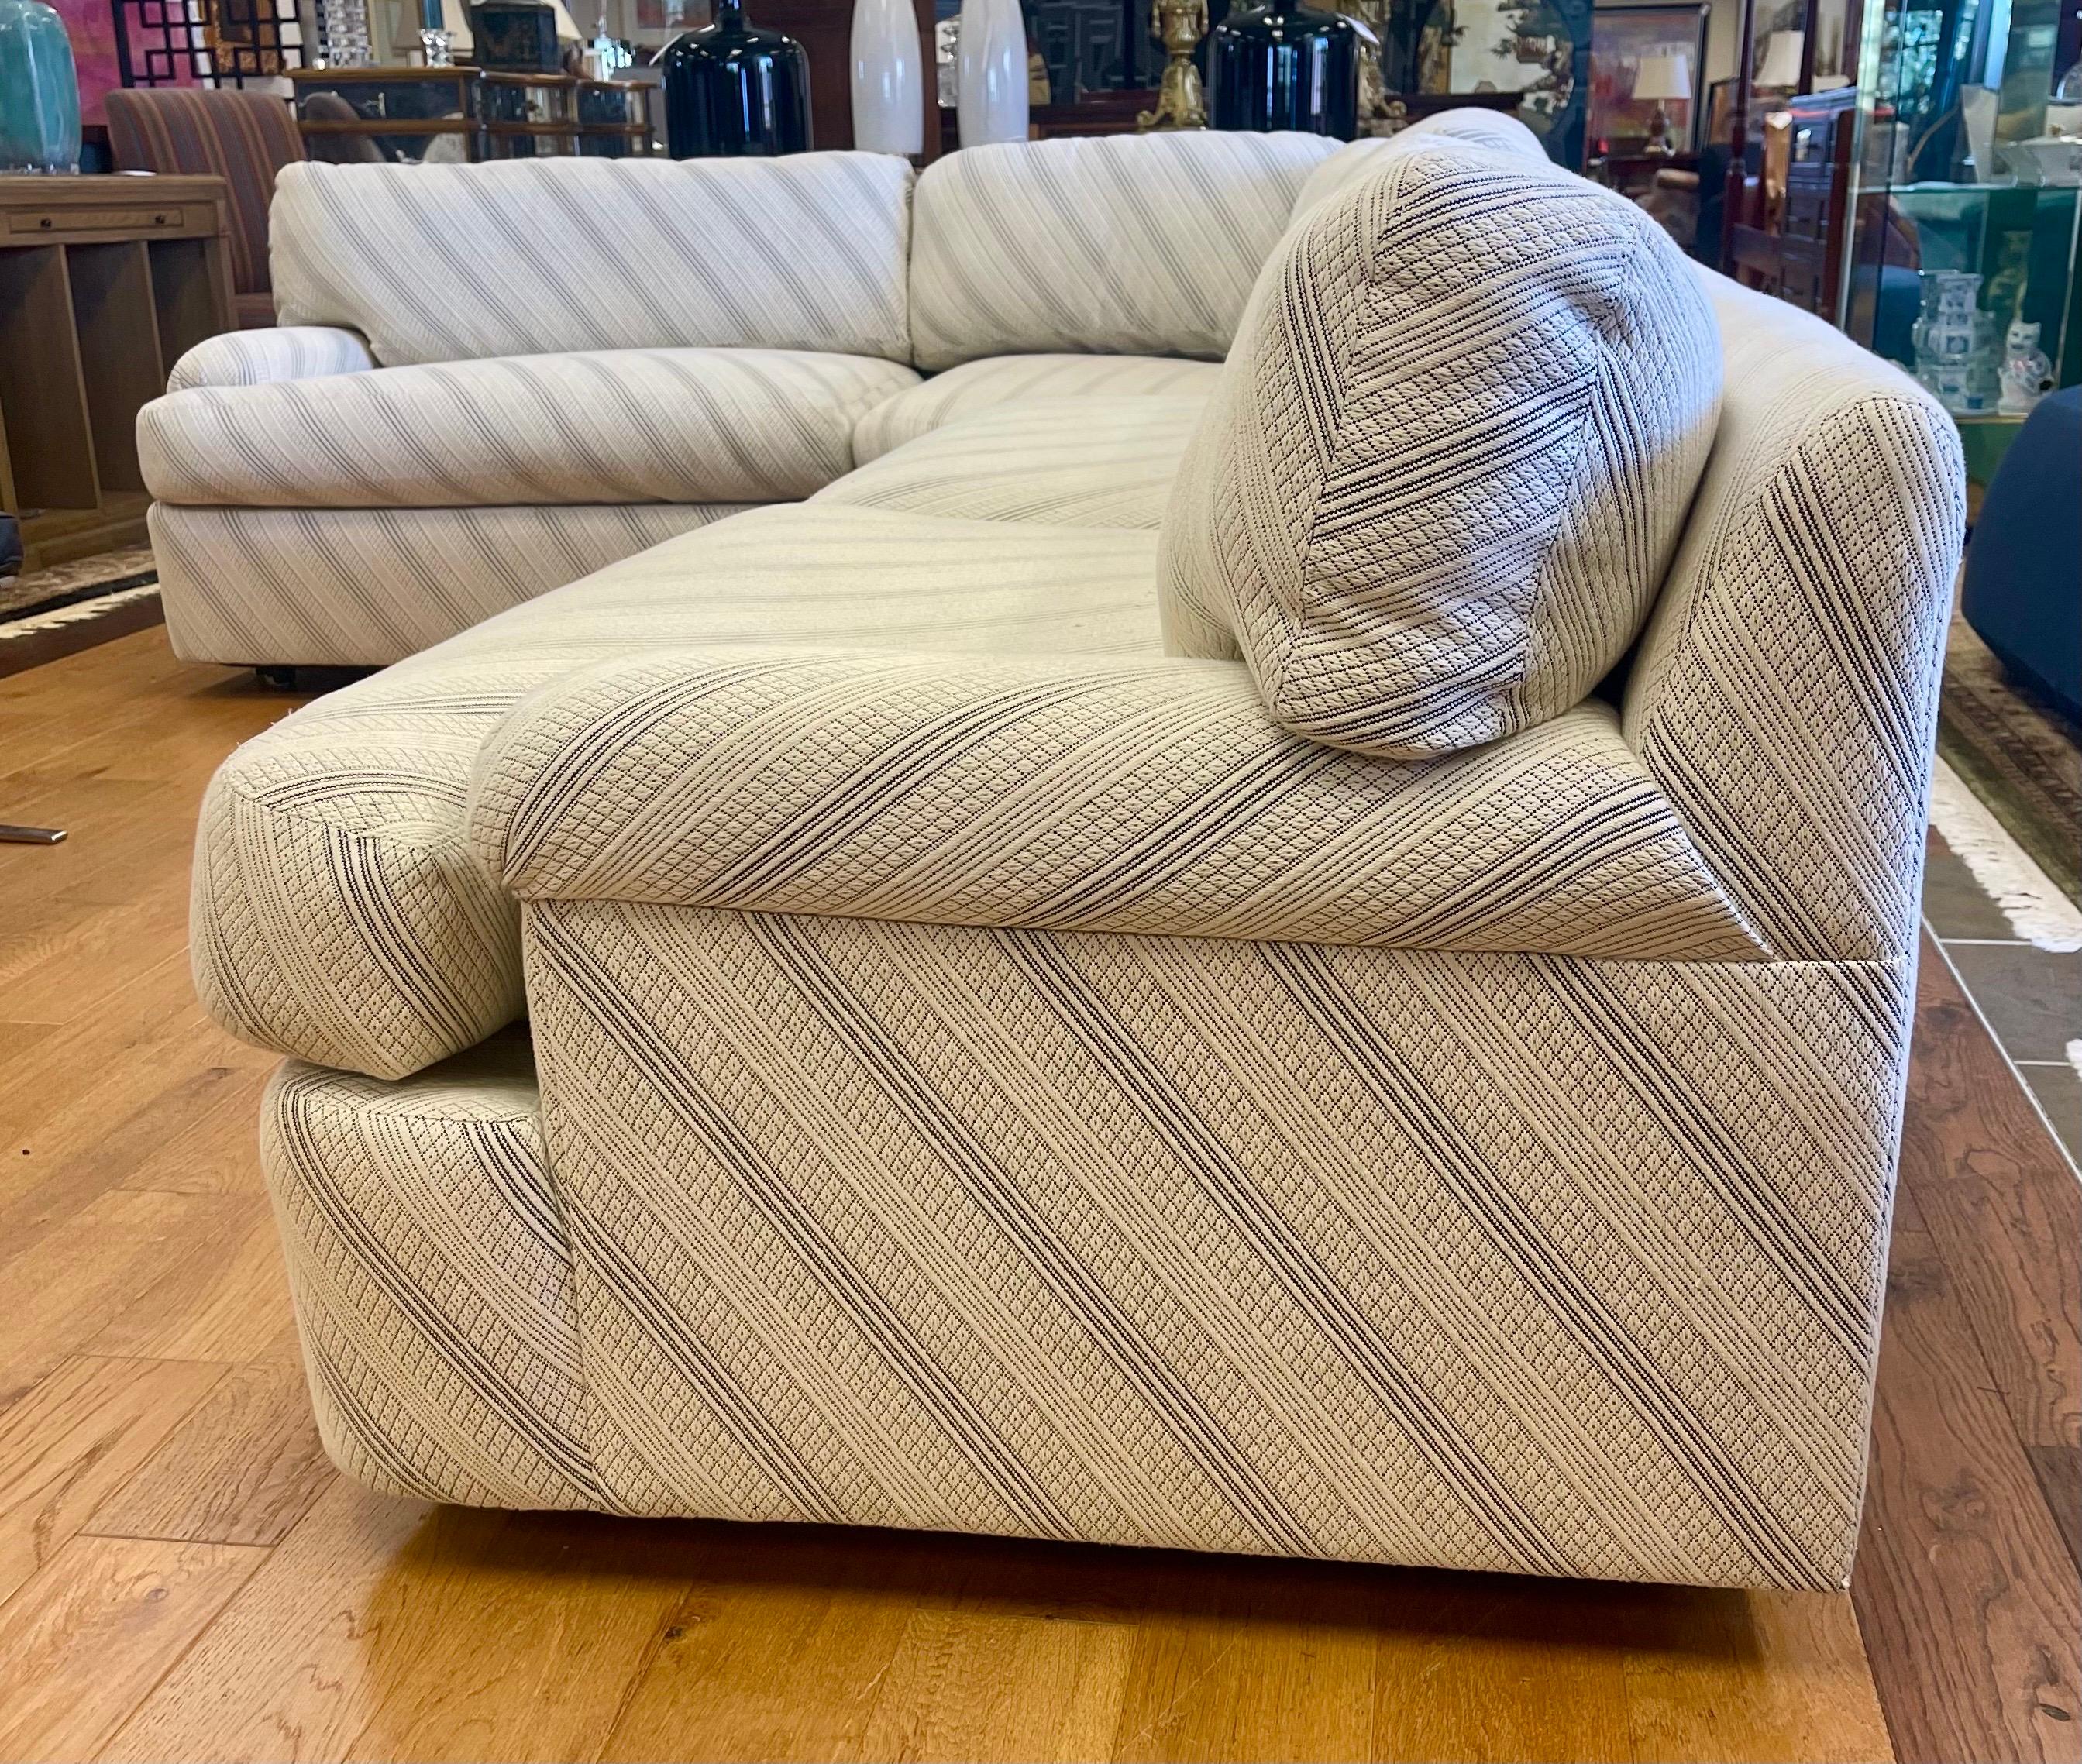 Stunning curved iconic mid century masterpiece from Directional Furniture circa 1970s.  Still in great condition with only age appropriate wear.  Three pieces and note the center curved piece can float for another option.
Fabric is an cream colored